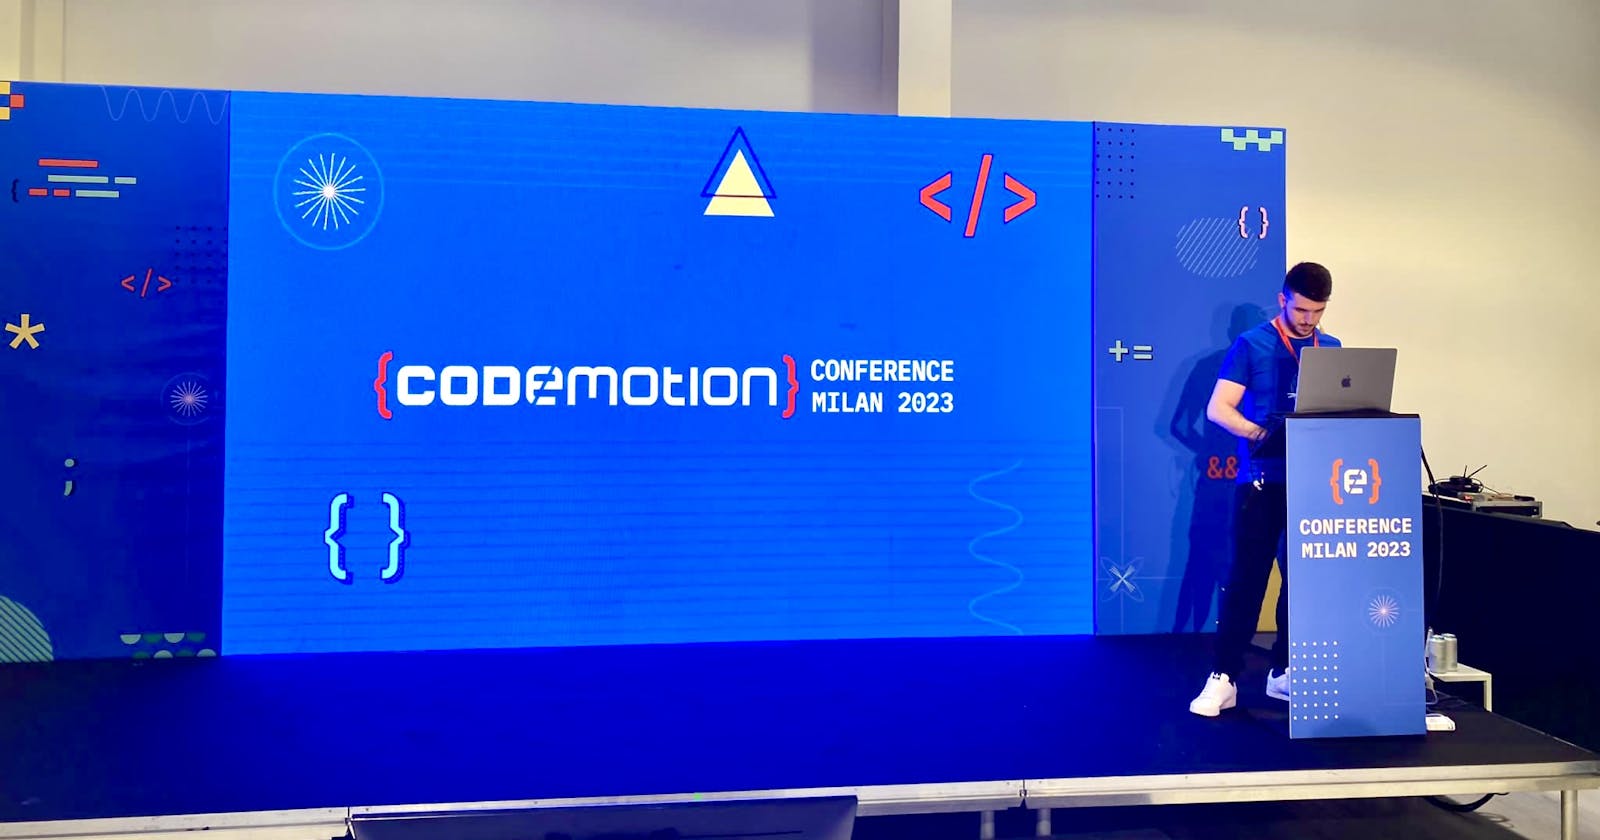 Codemotion Milan 2023: my first session in public